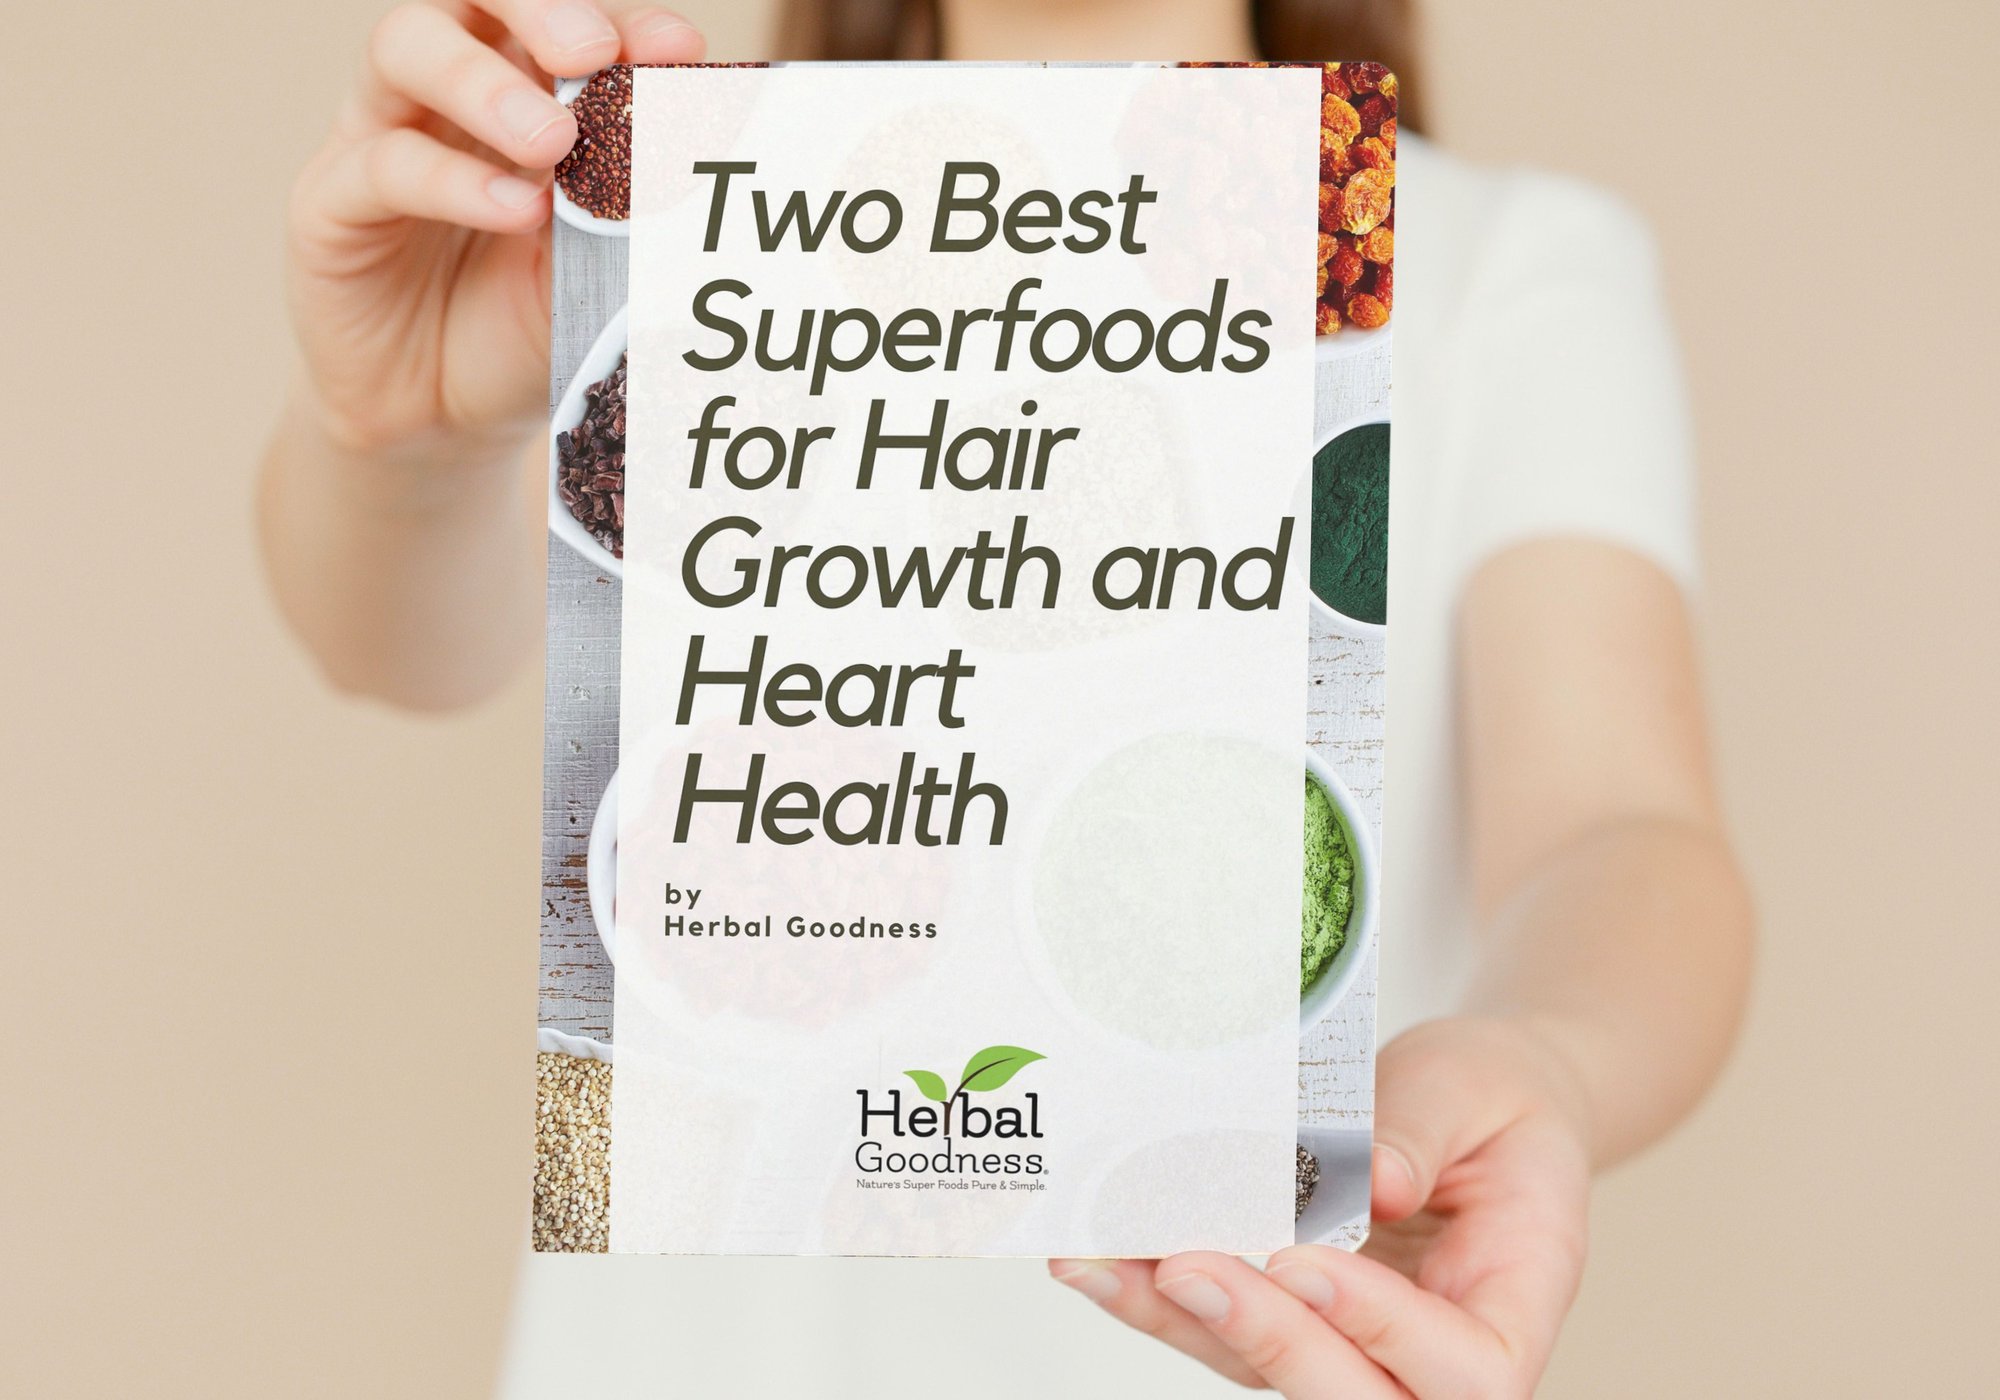 Two Best Superfoods for Hair Growth and Heart Health  Herbal Godness ebook